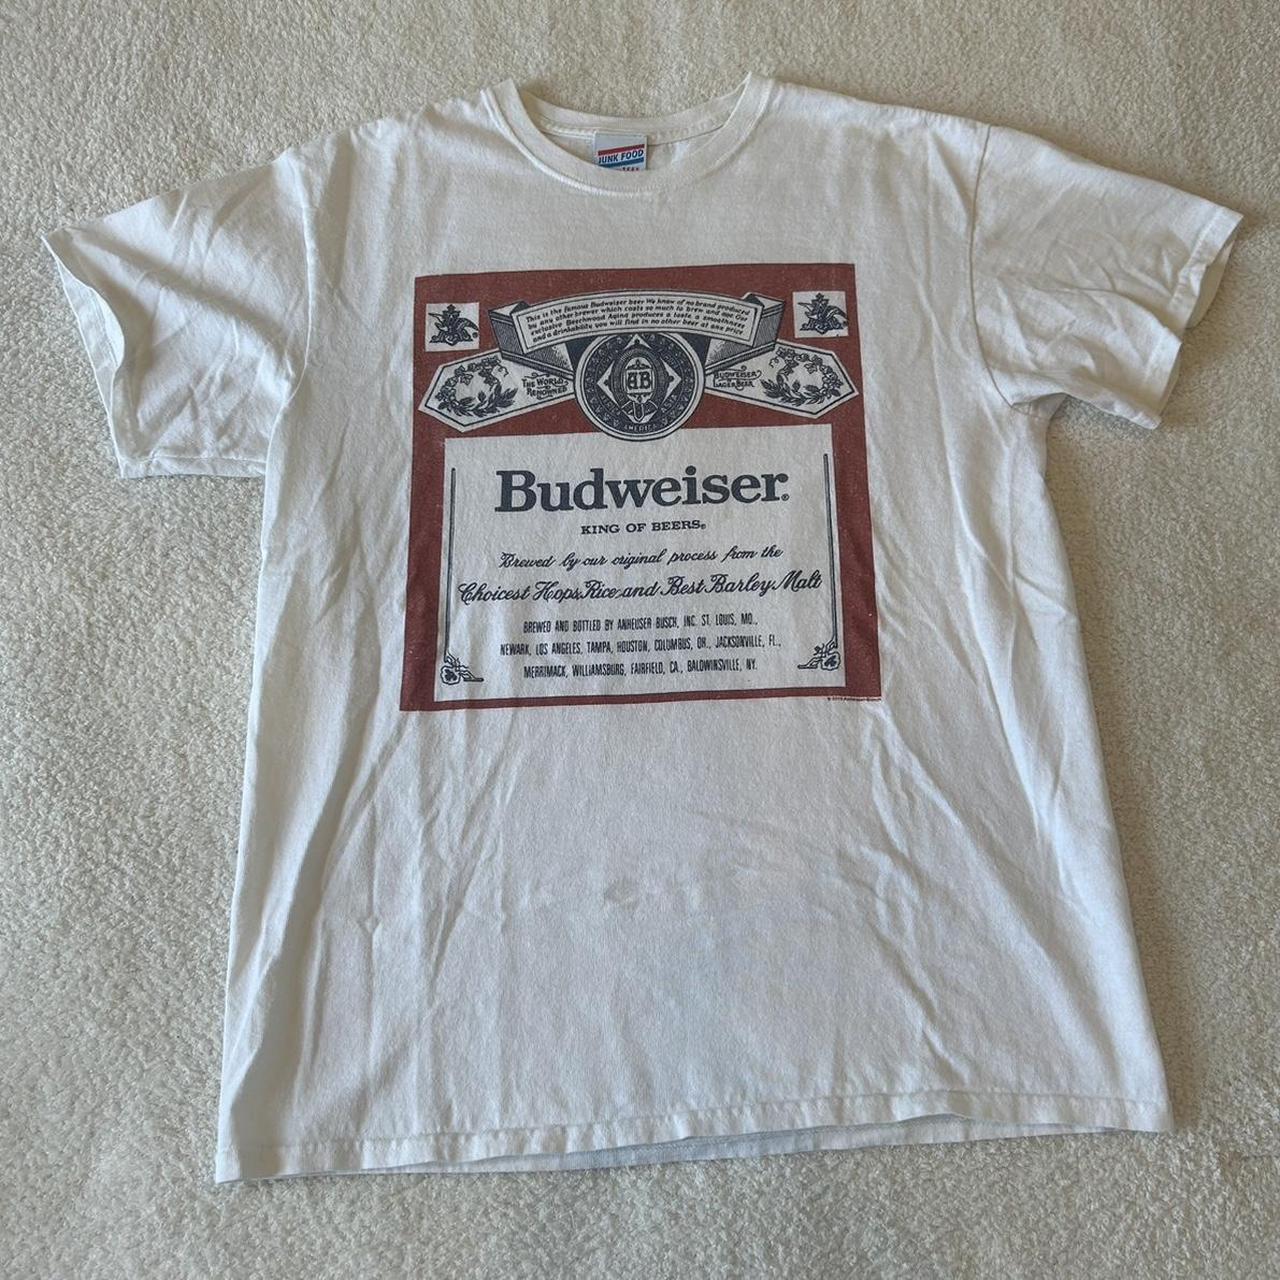 Urban outfitters Budweiser tshirt. Size small. No... - Depop